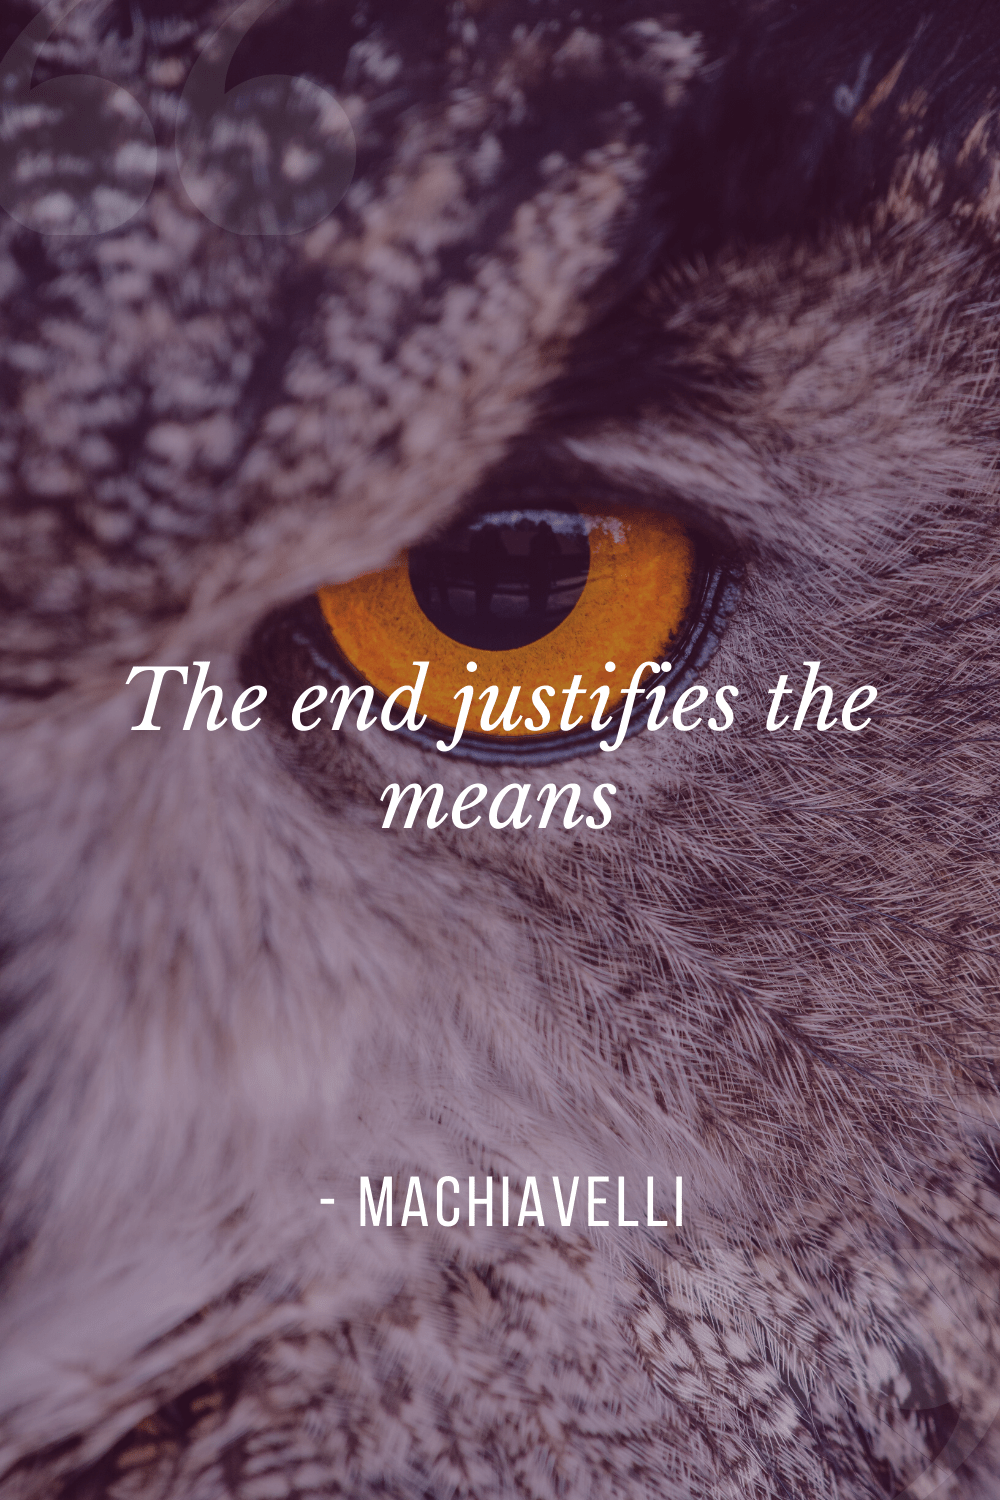 “The end justifies the means”, Niccolò Machiavelli